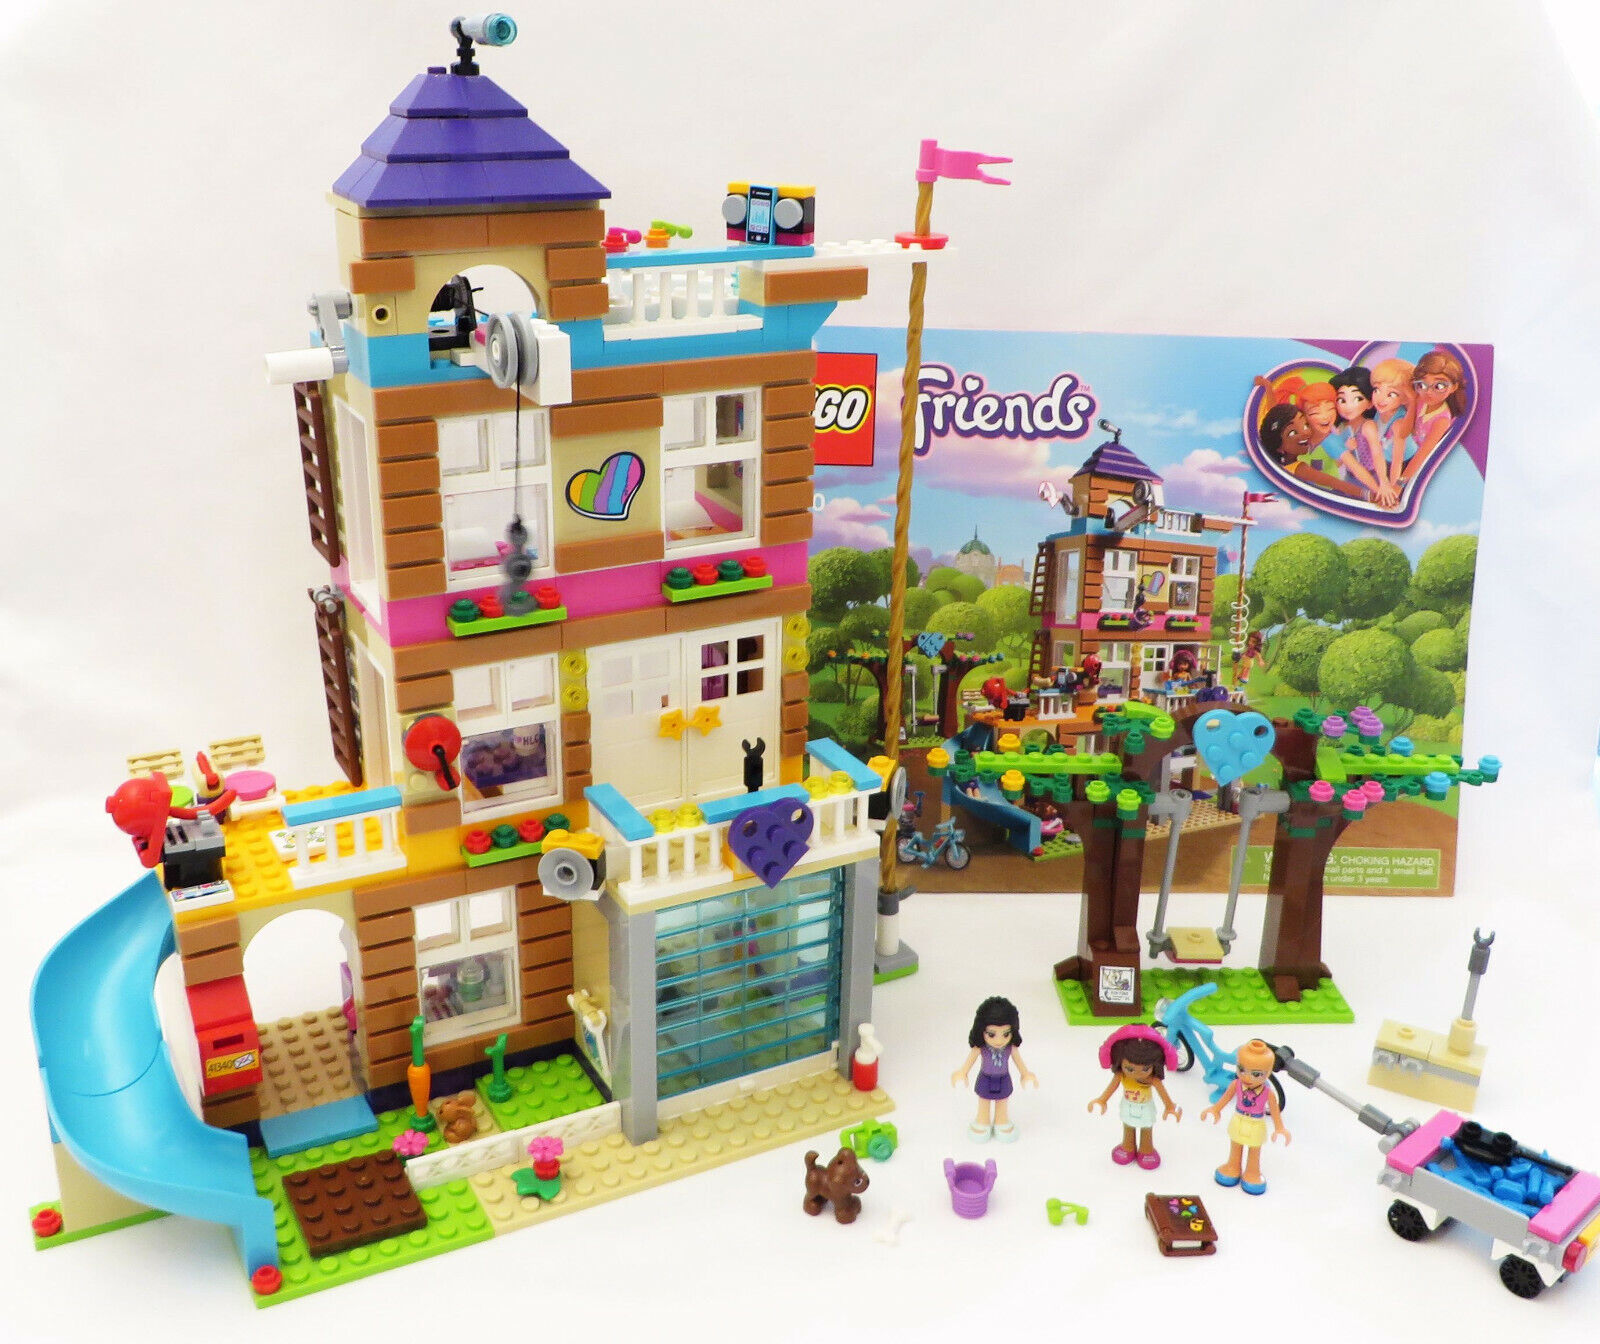 LEGO Friends 41340 Friendship House - Incomplete